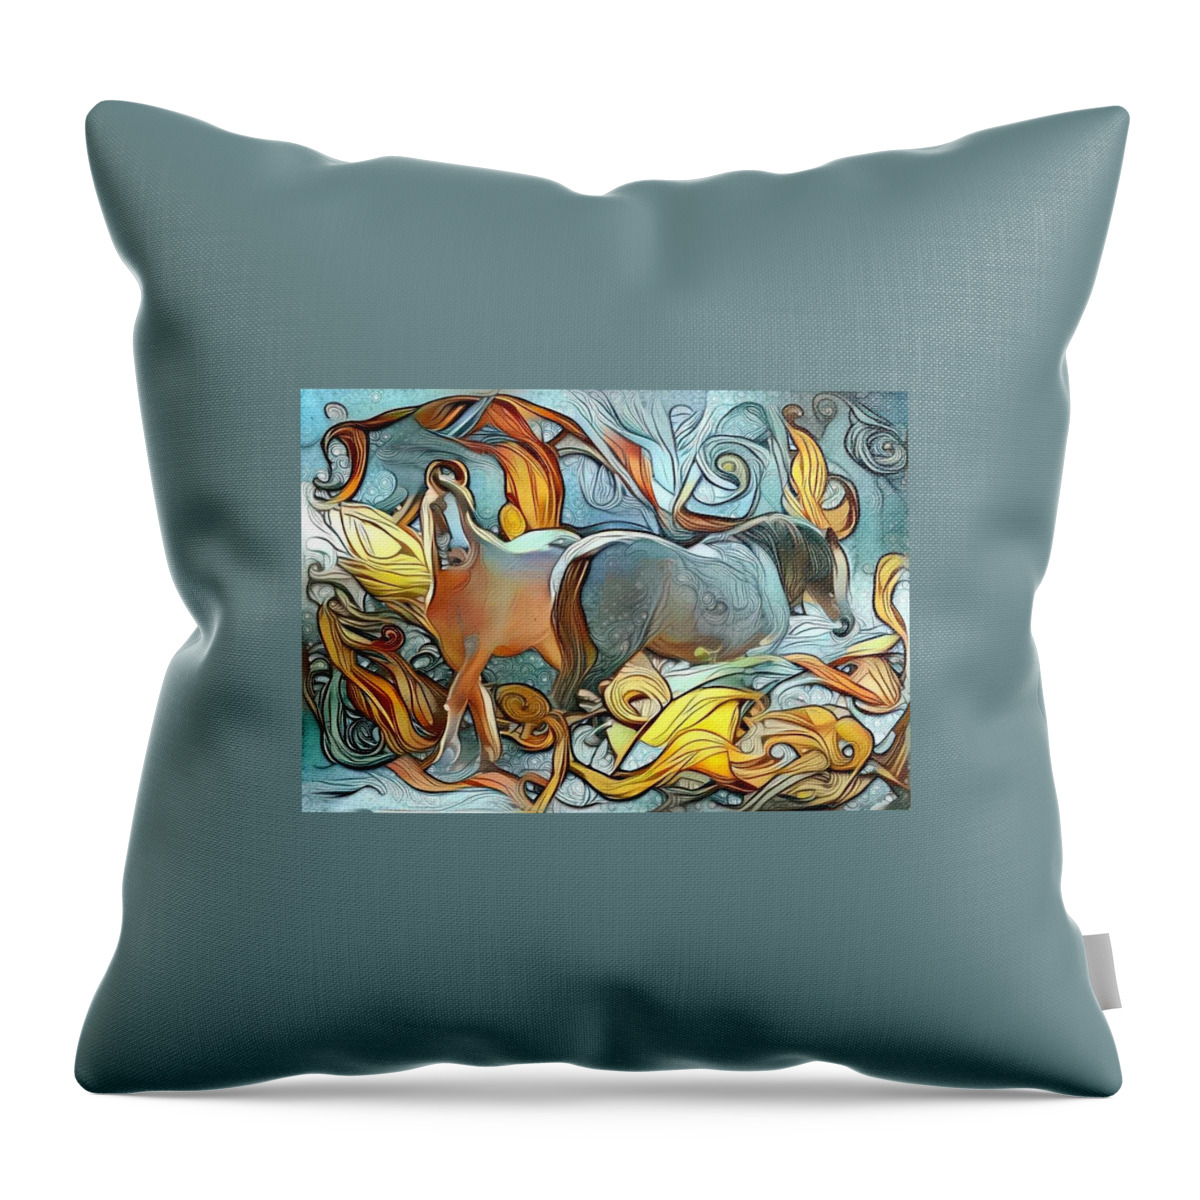 Belgian Horse Throw Pillow featuring the digital art Passing Fancy 1 by Listen To Your Horse